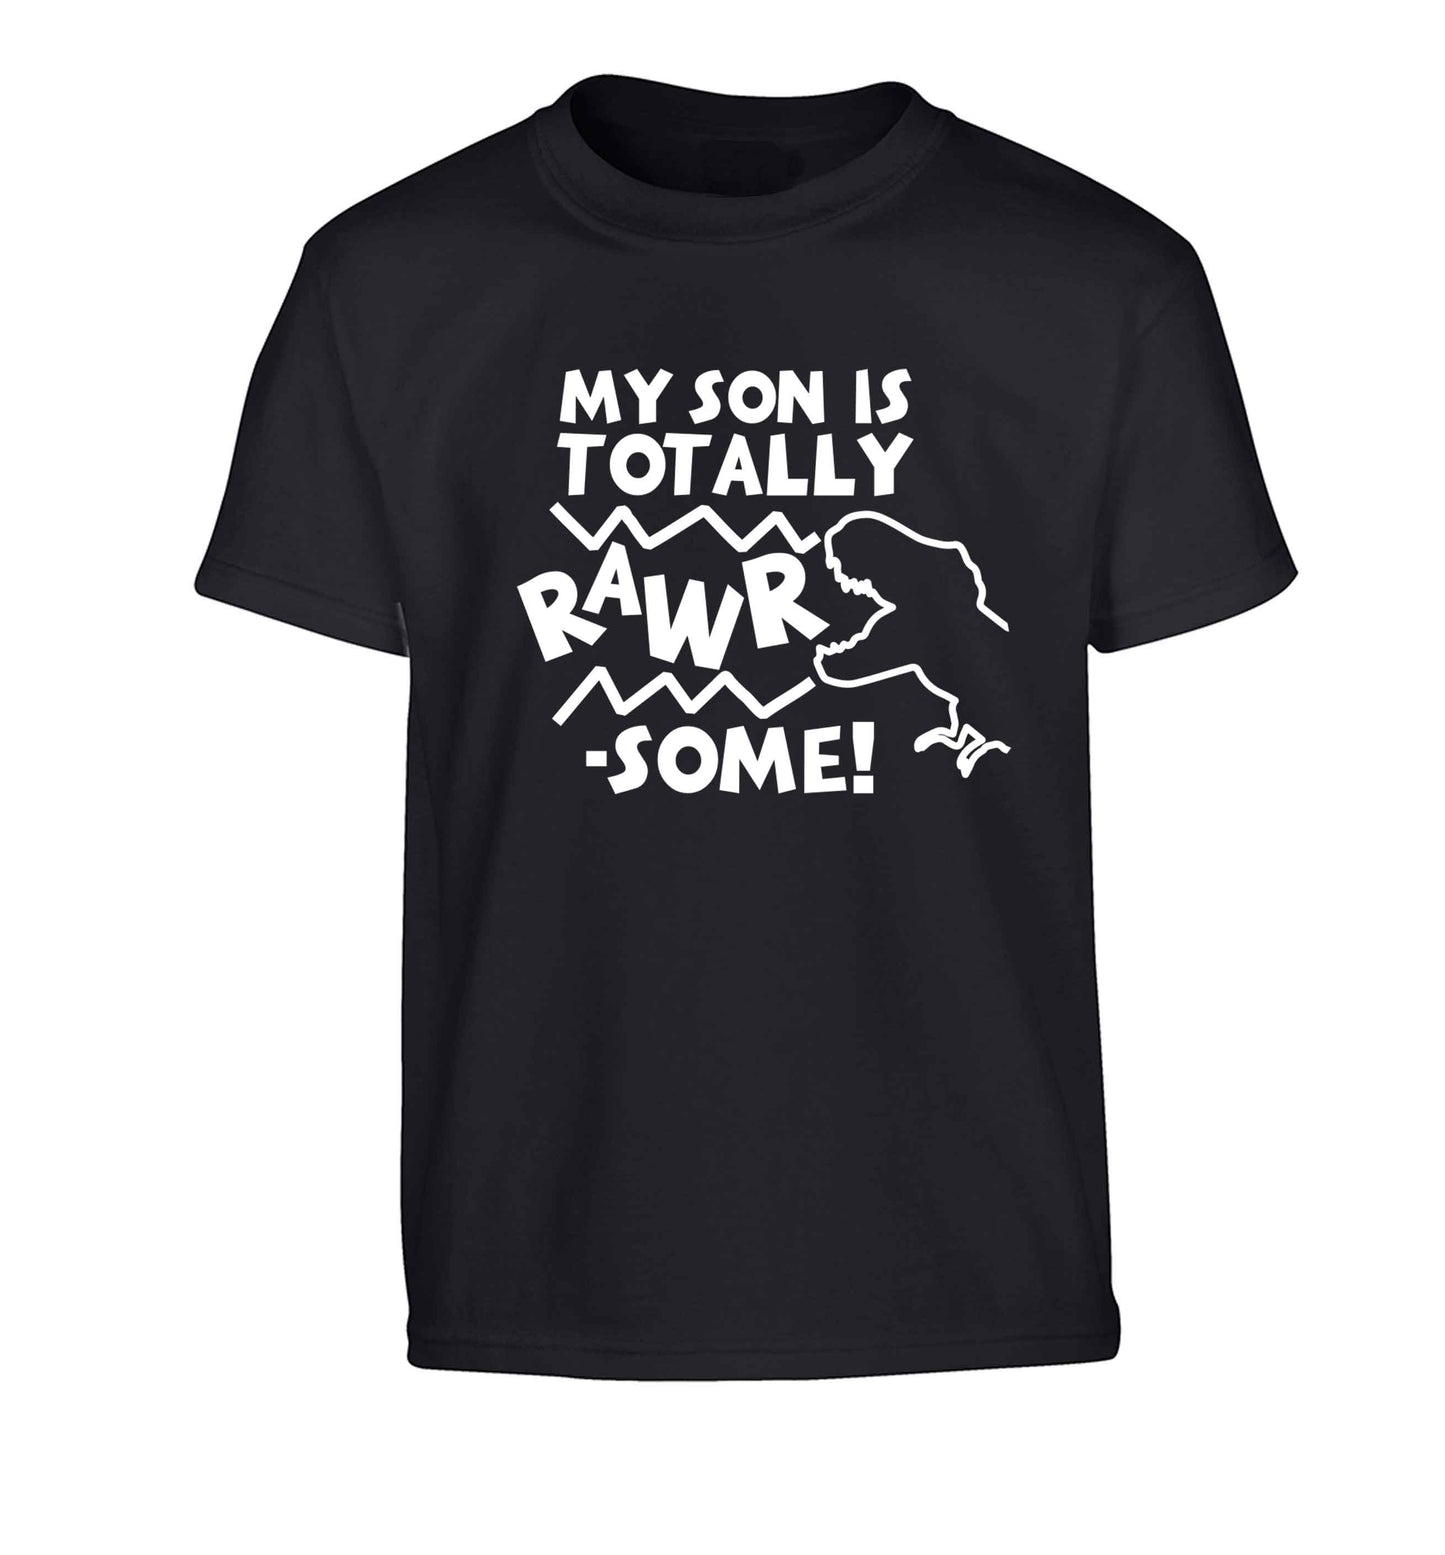 My son is totally rawrsome Children's black Tshirt 12-13 Years